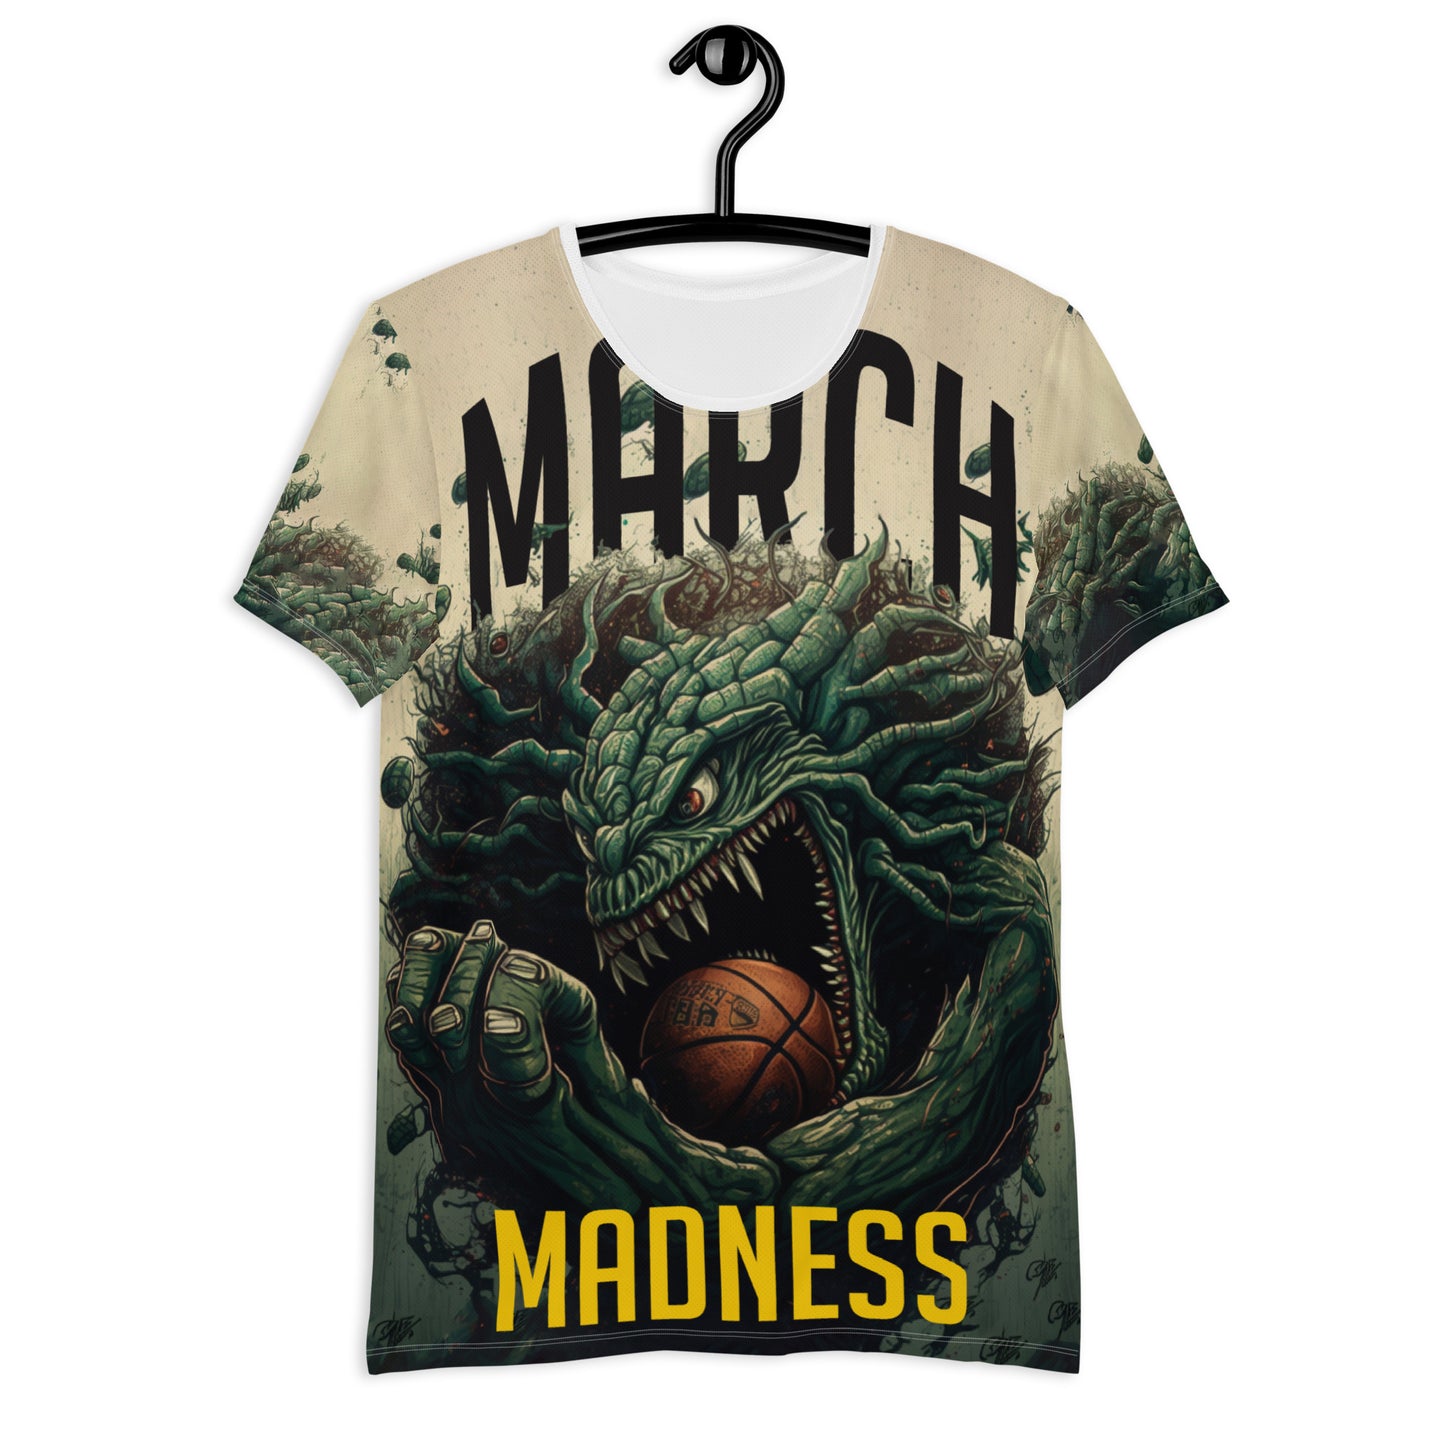 March Madness - Men's Athletic T-shirt